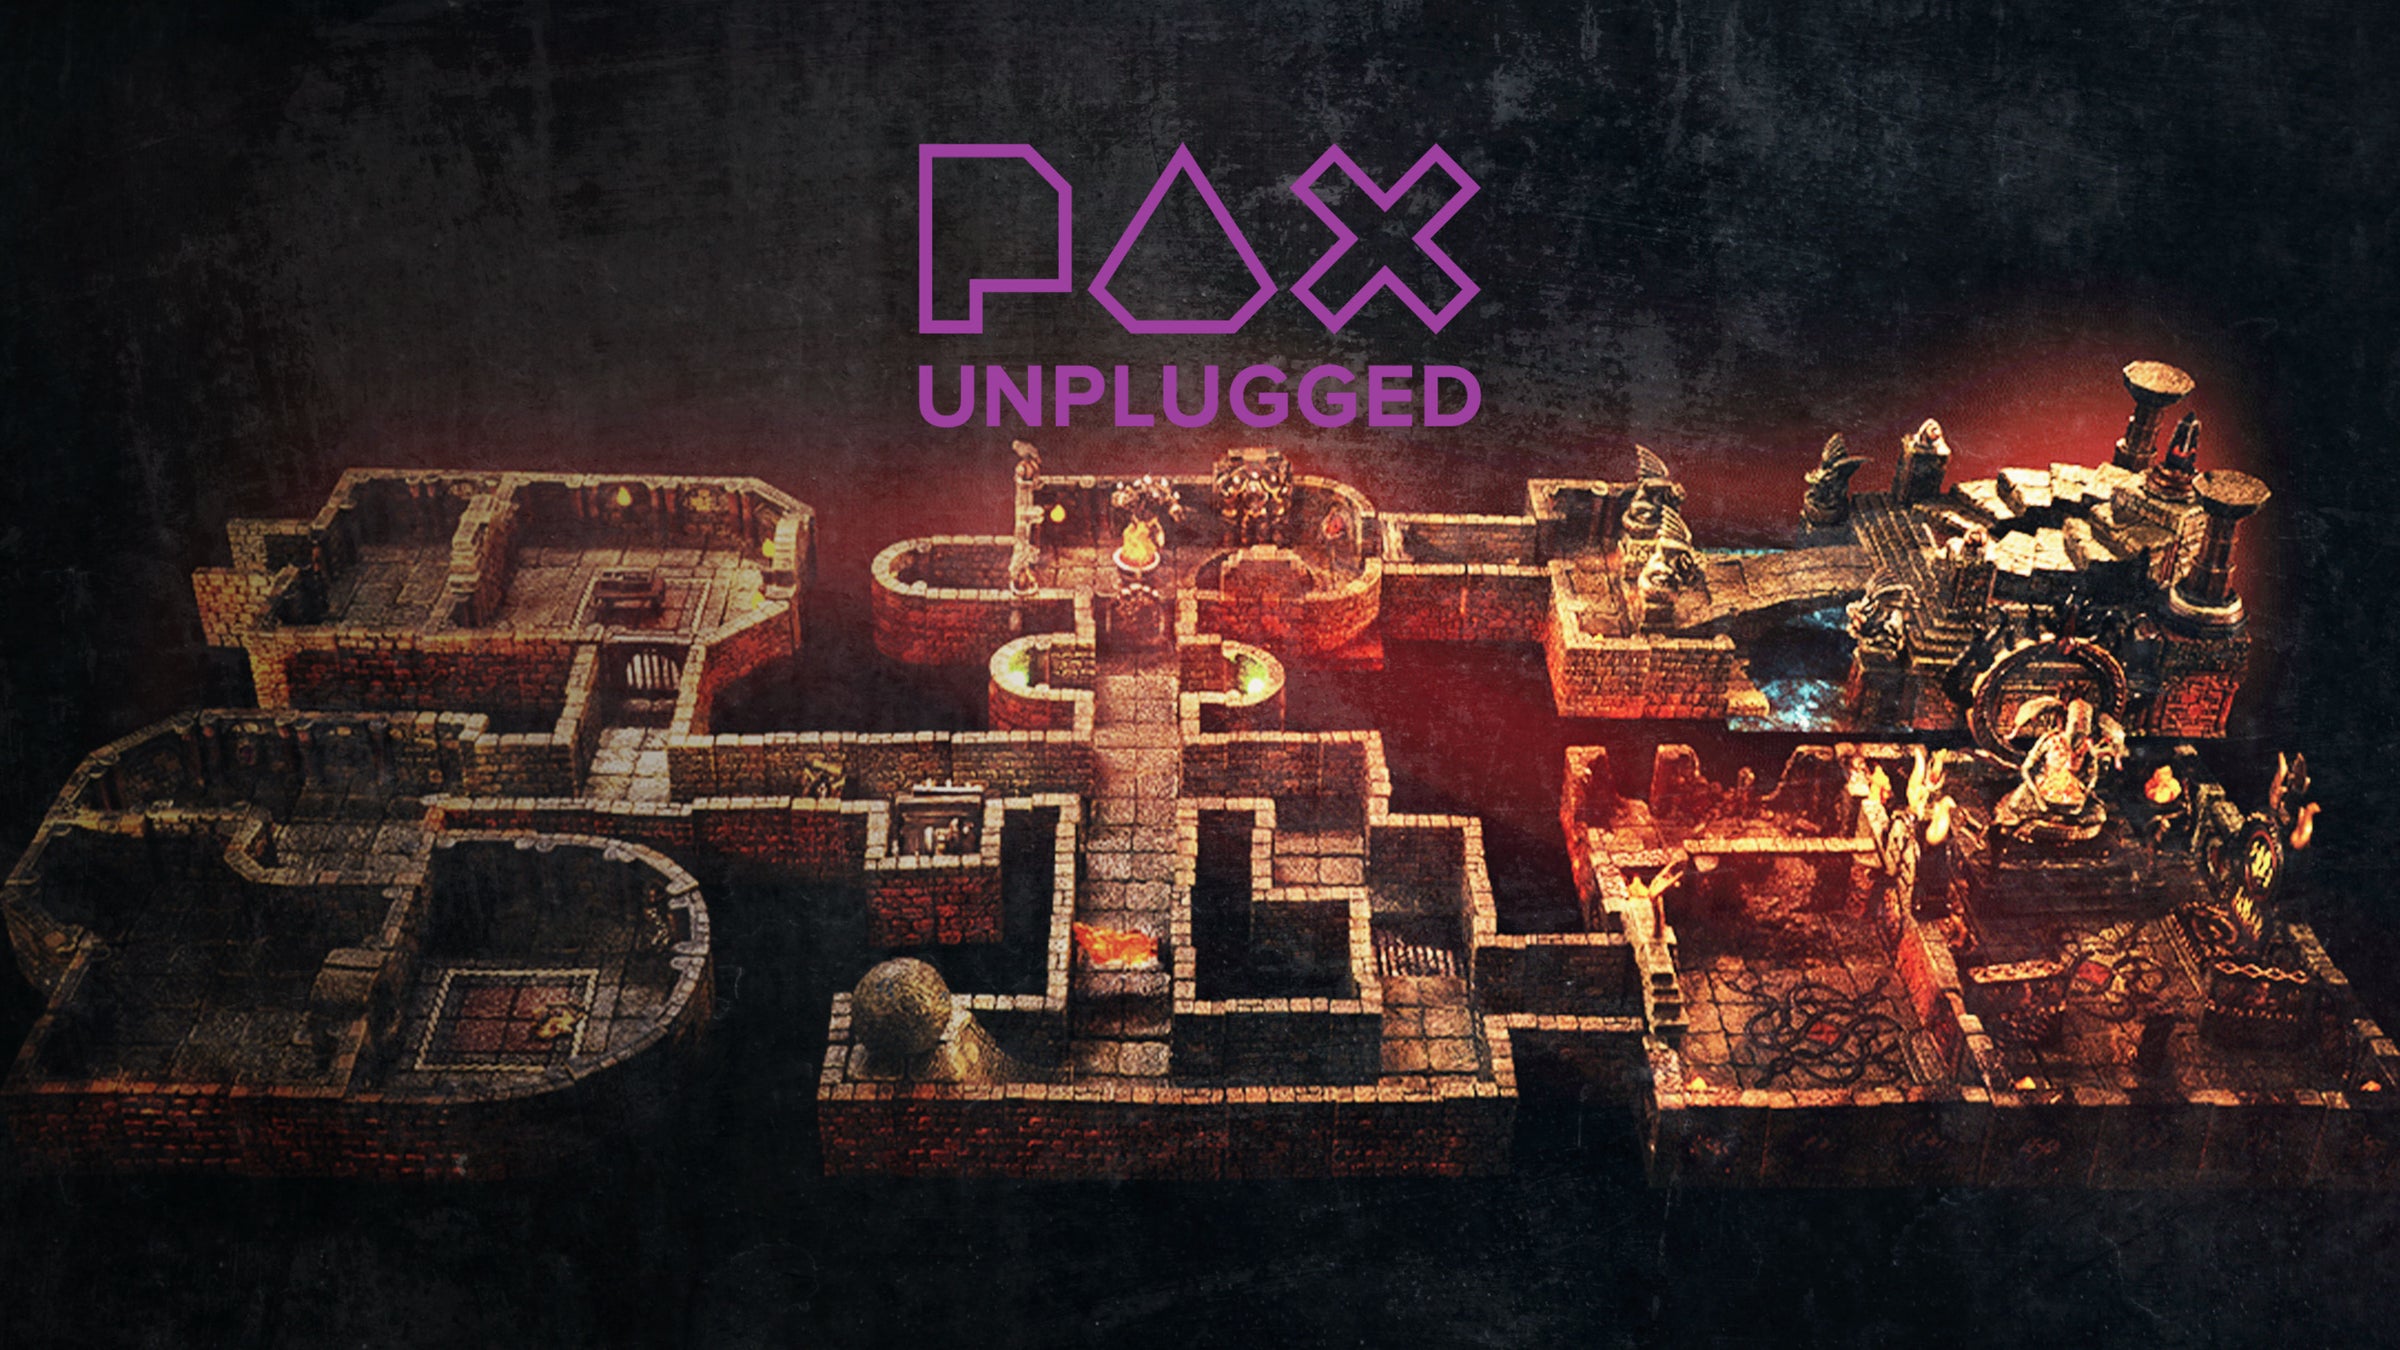 The entirety of Dungeon of Doom against a red and purple background with the PAX Unplugged logo above it.